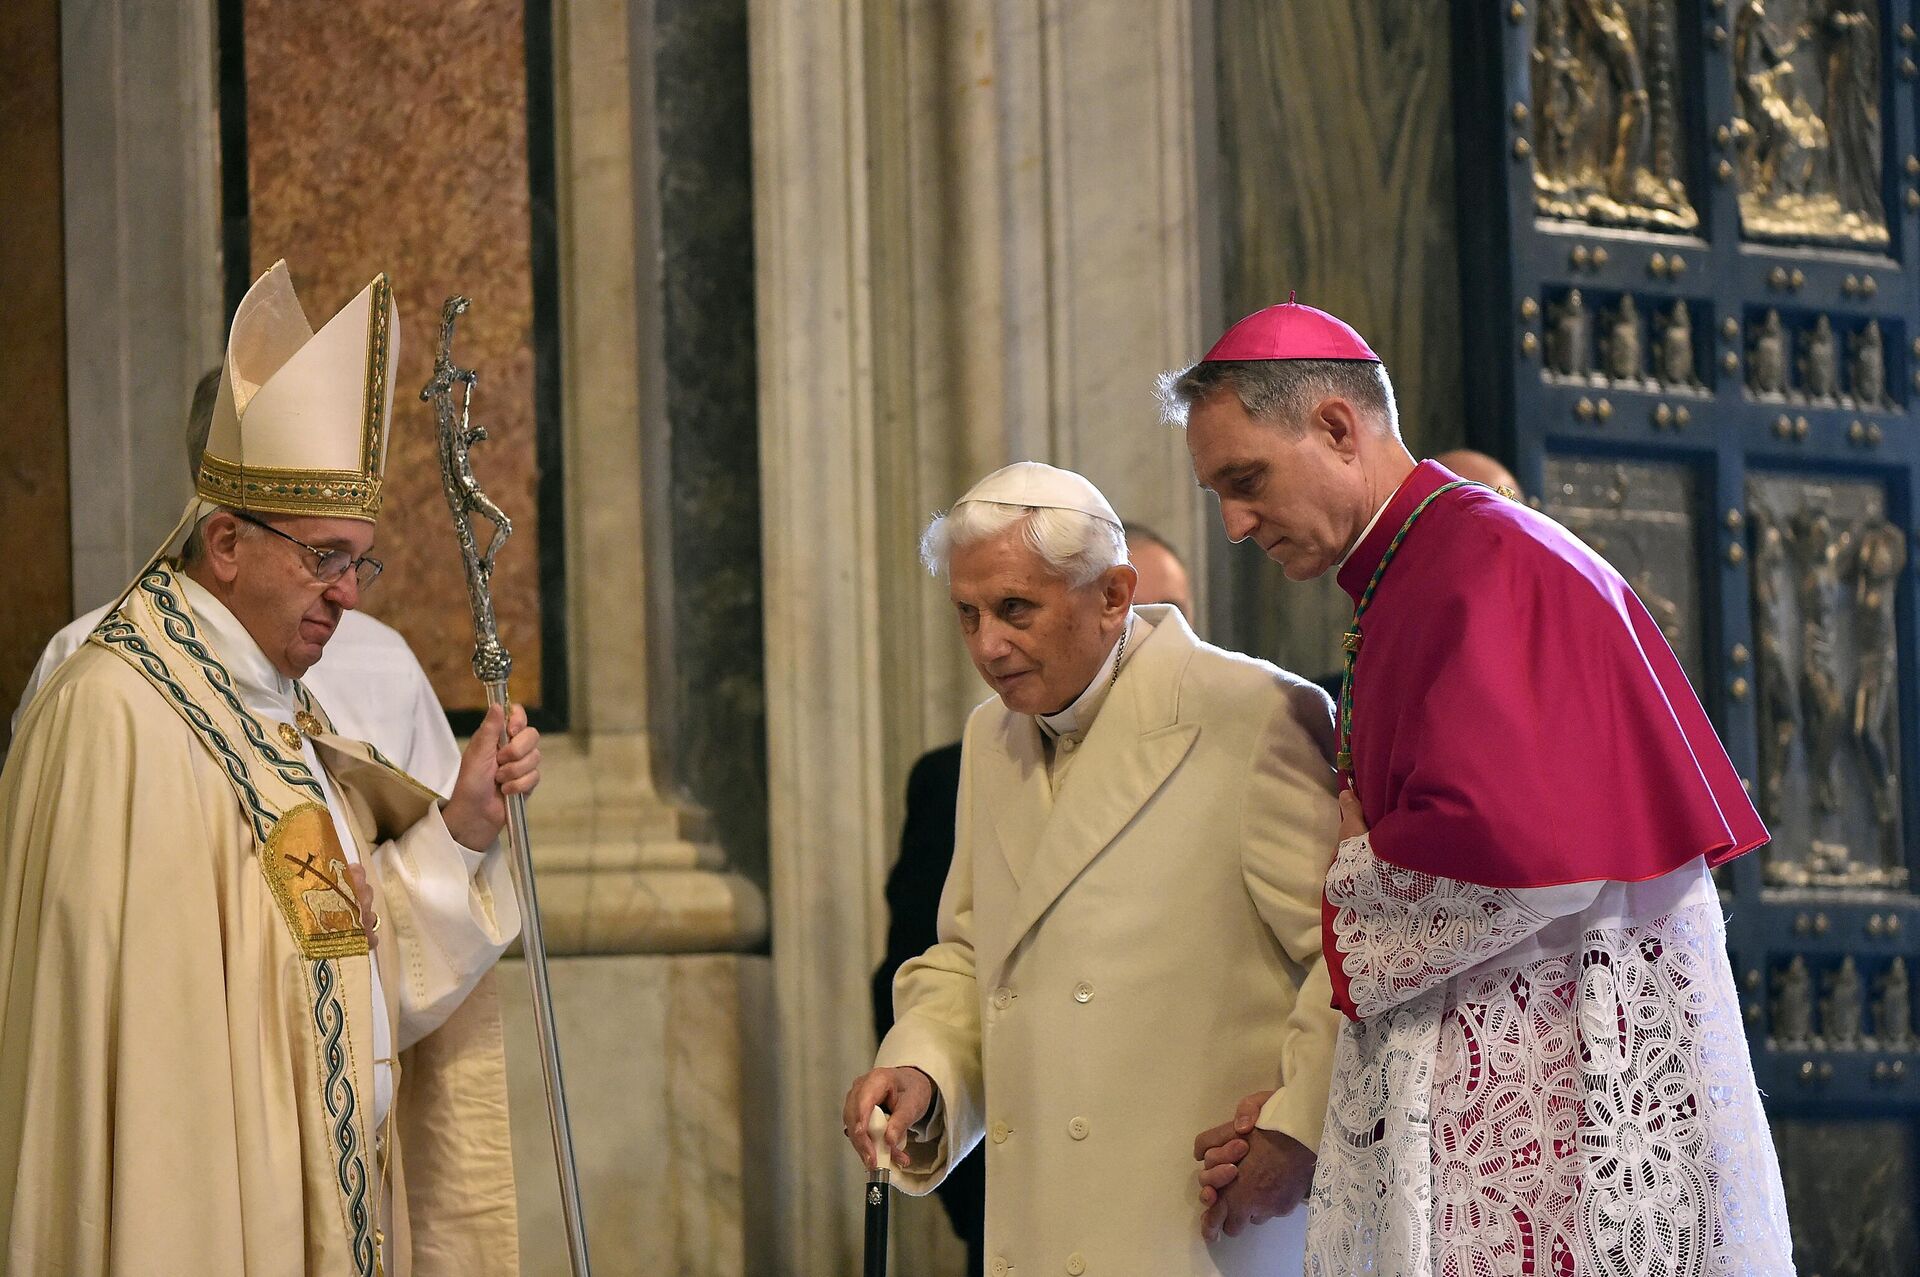 Pope Emeritus Benedict XVI (C) is helped by the prefect of the papal household Georg Gaenswein (R) to pass the Holy Door as Pope Francis (L) looks on, on December 8, 2015 in Vatican. - Sputnik International, 1920, 10.01.2023